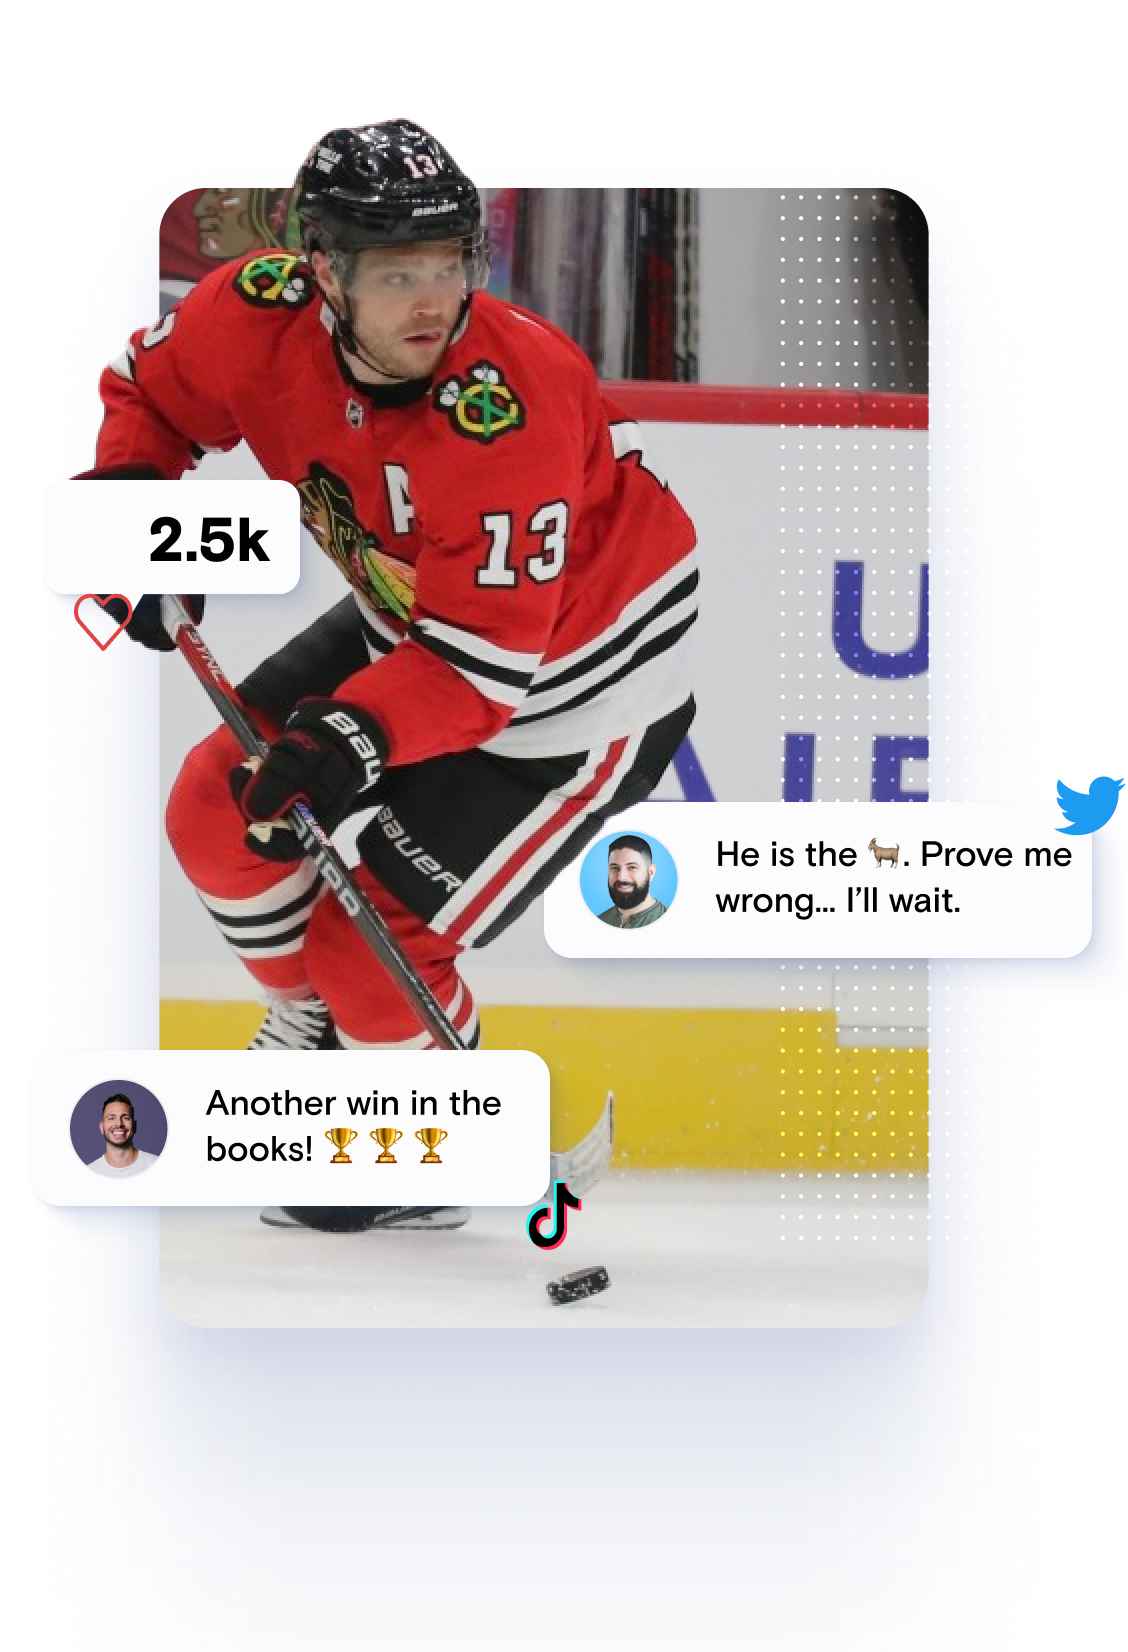 Drive fan engagement through social media including distribution to hockey players